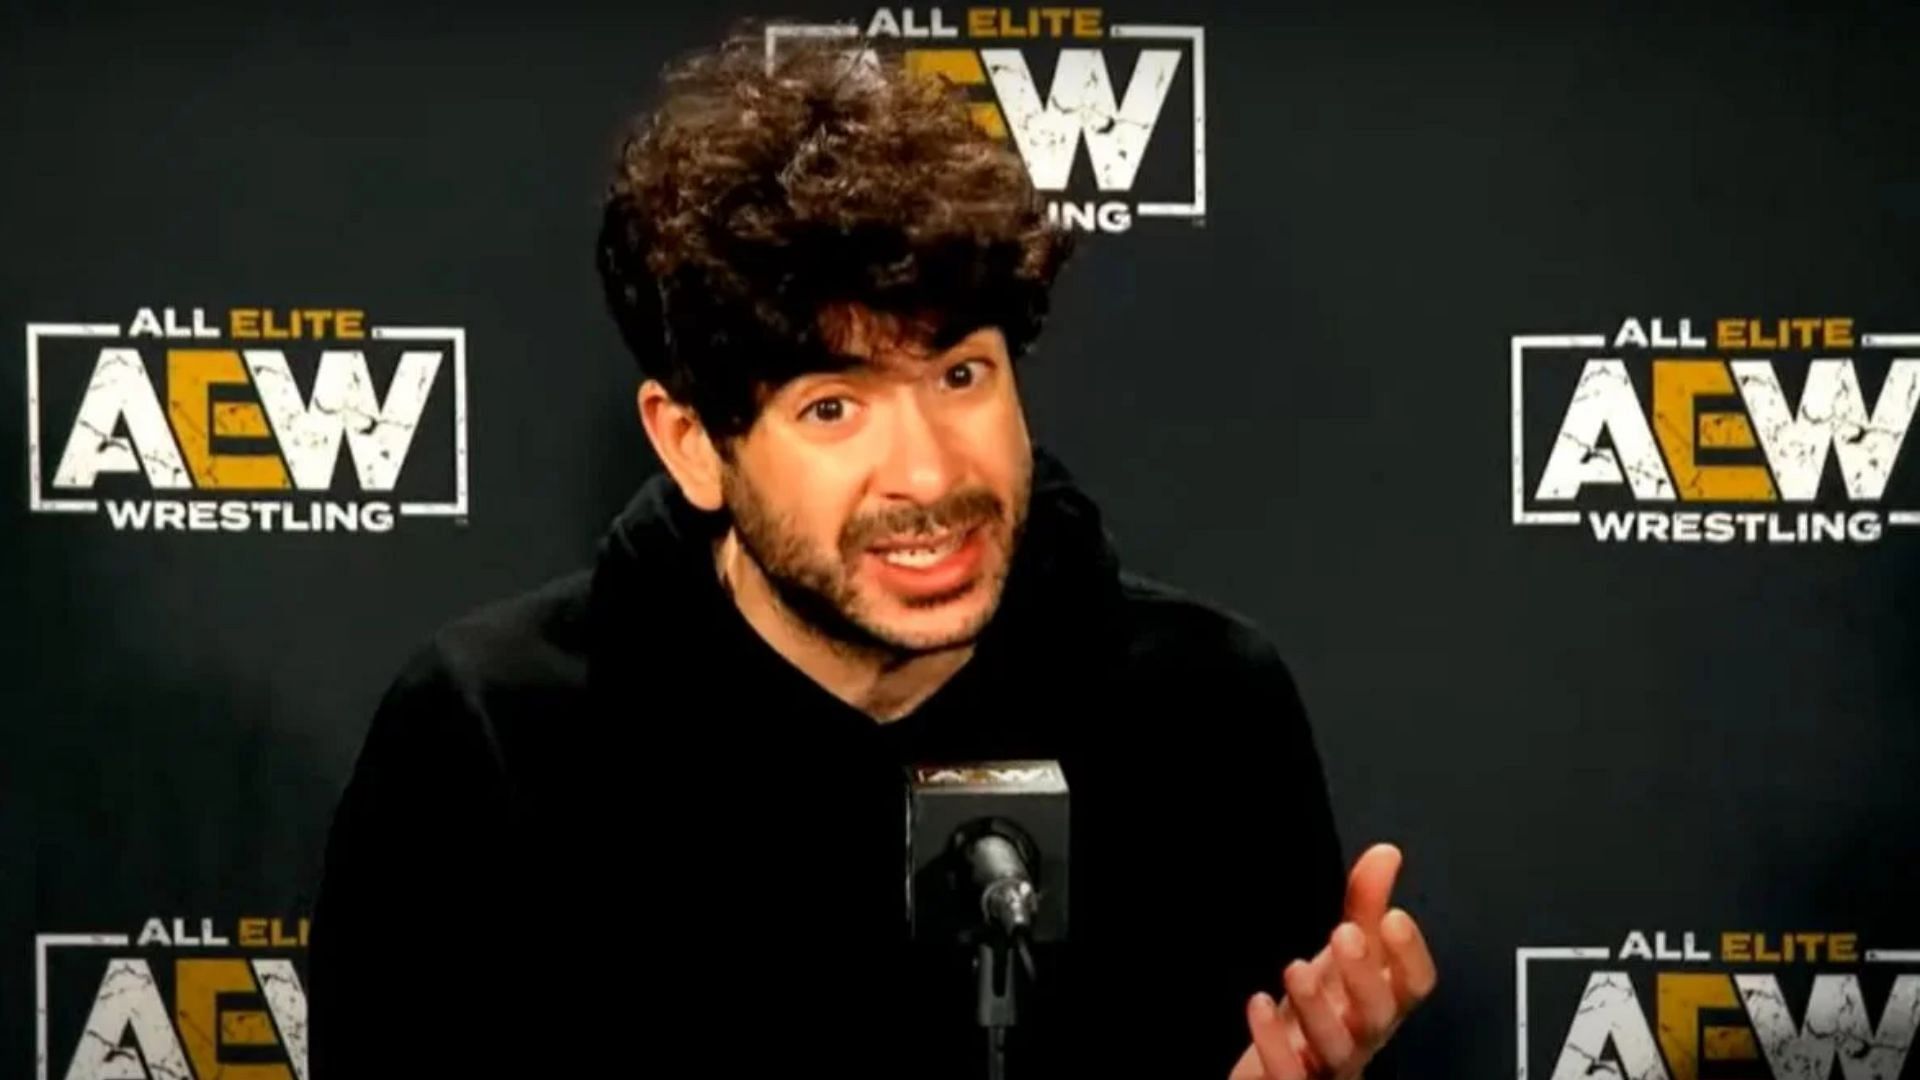 Tony Khan discloses influence behind his booking decisions